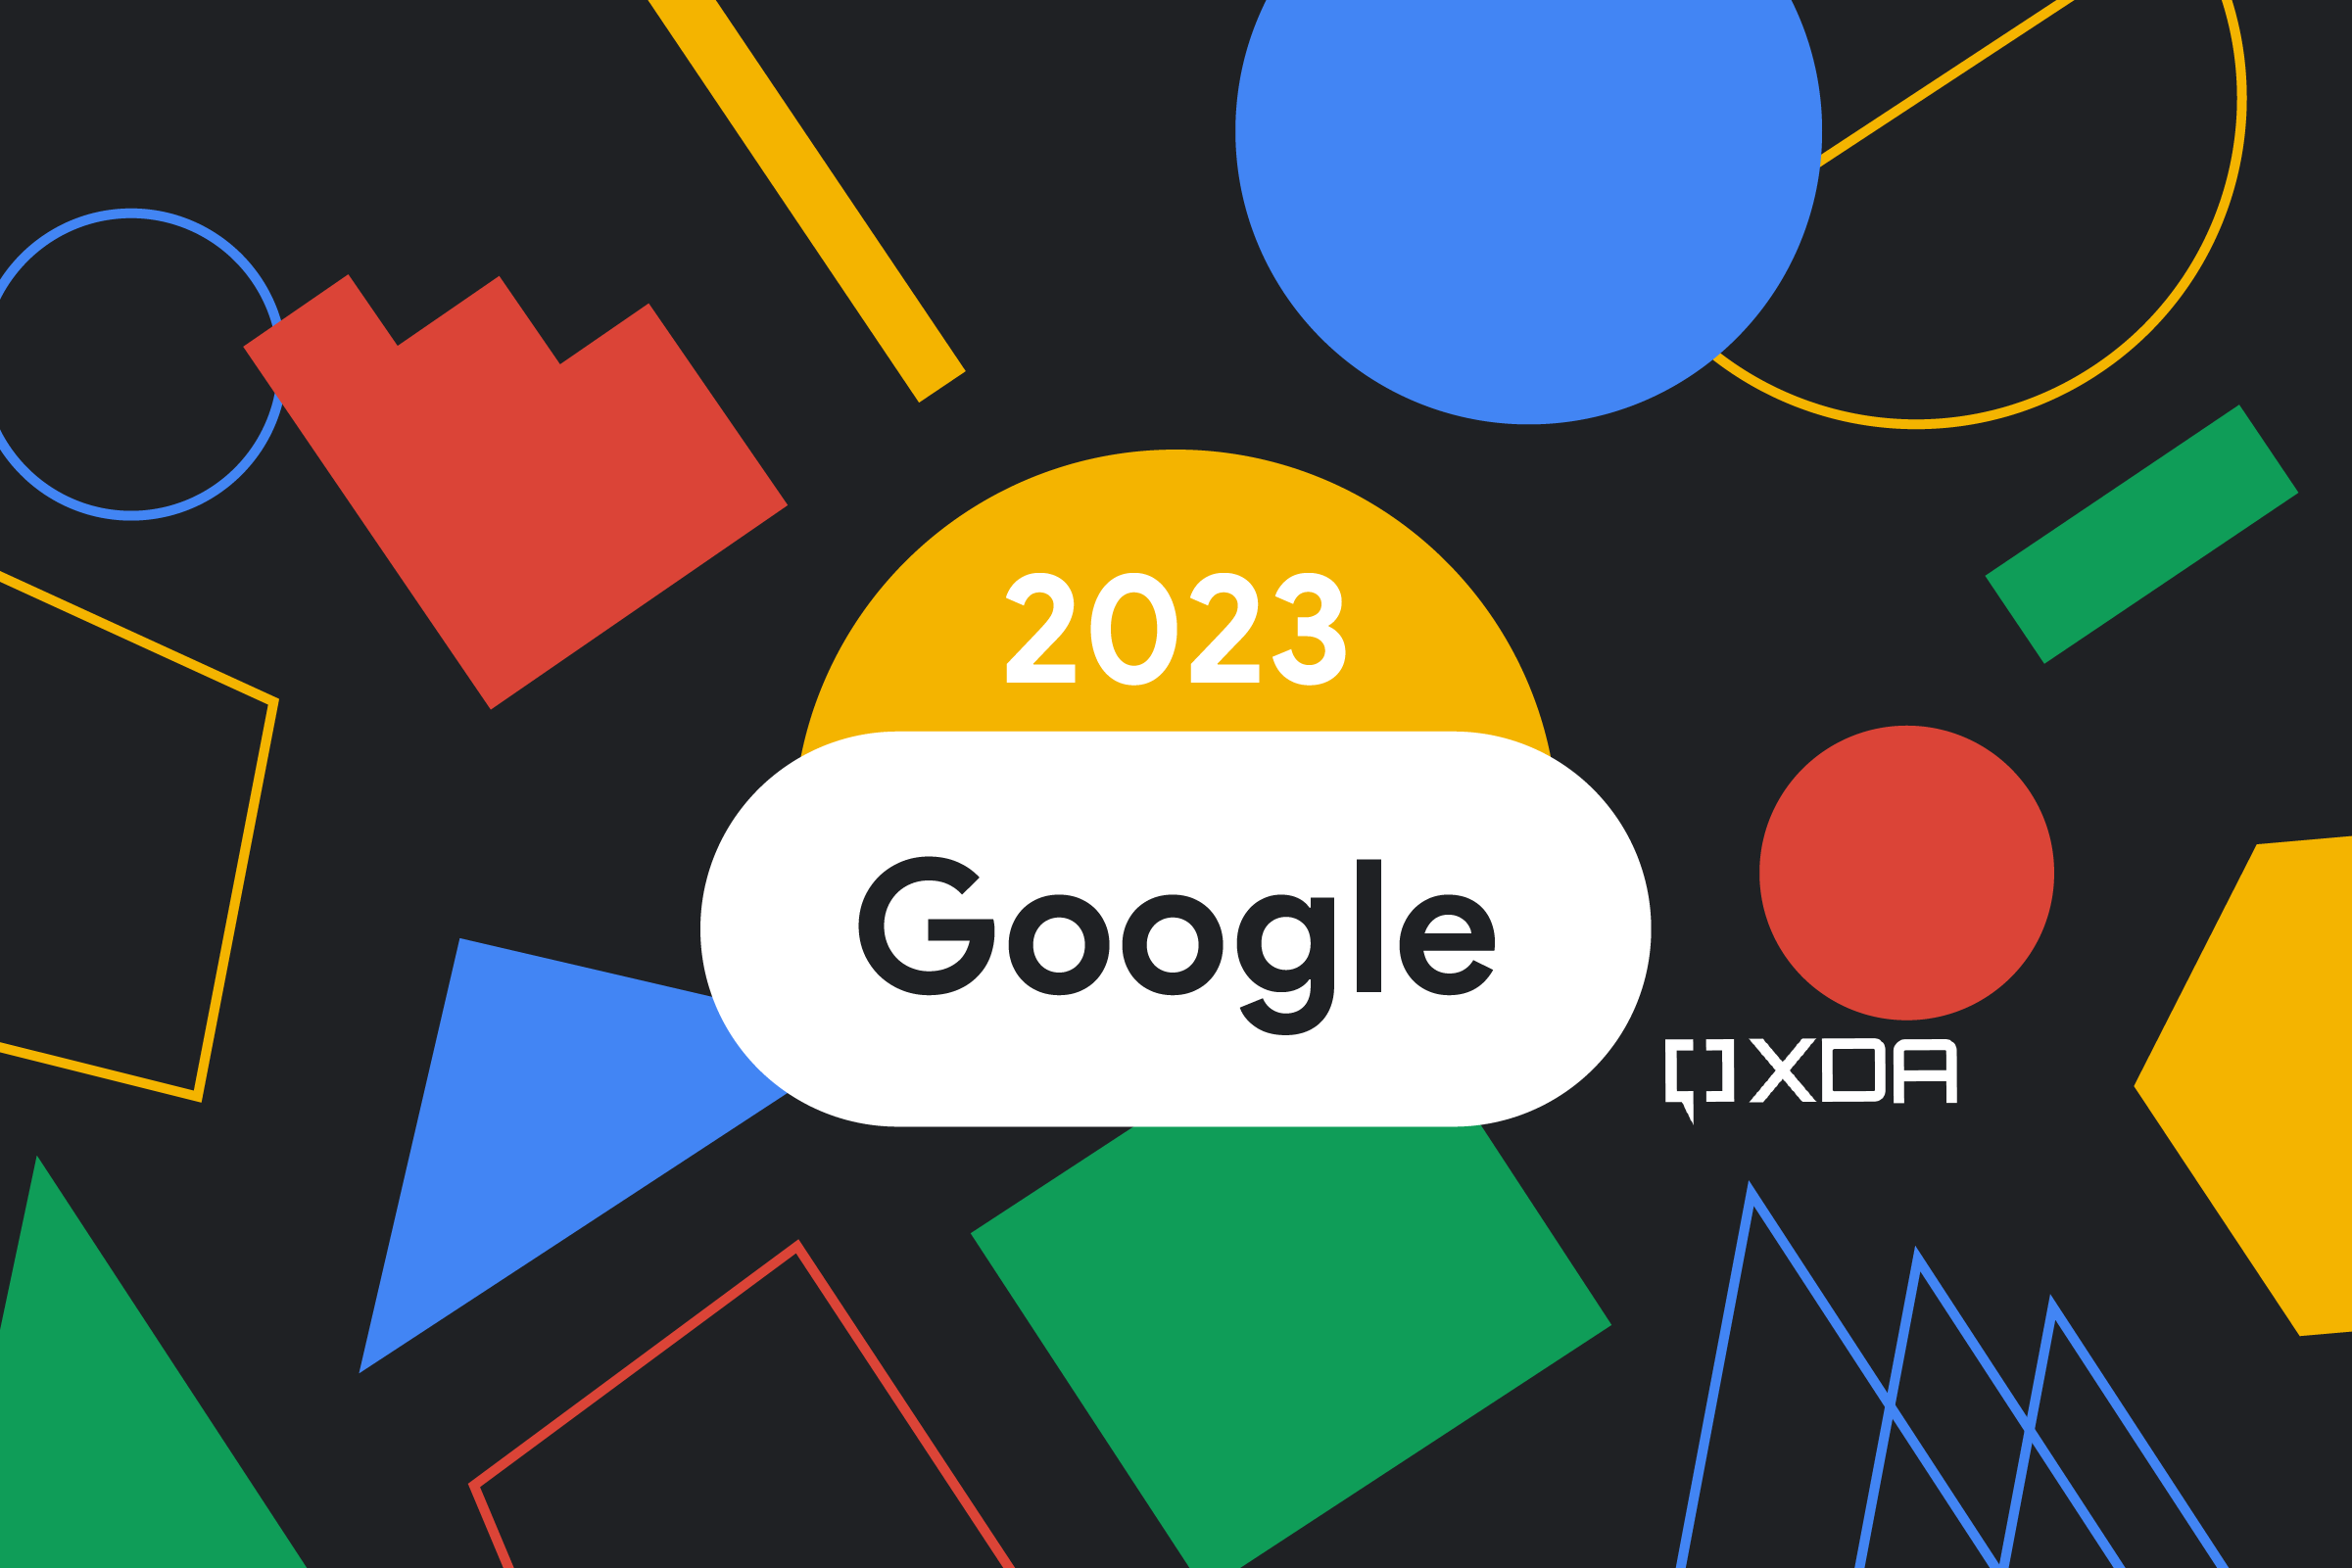 Google in 2023 Predictions, rumors, and what we want to see in the new